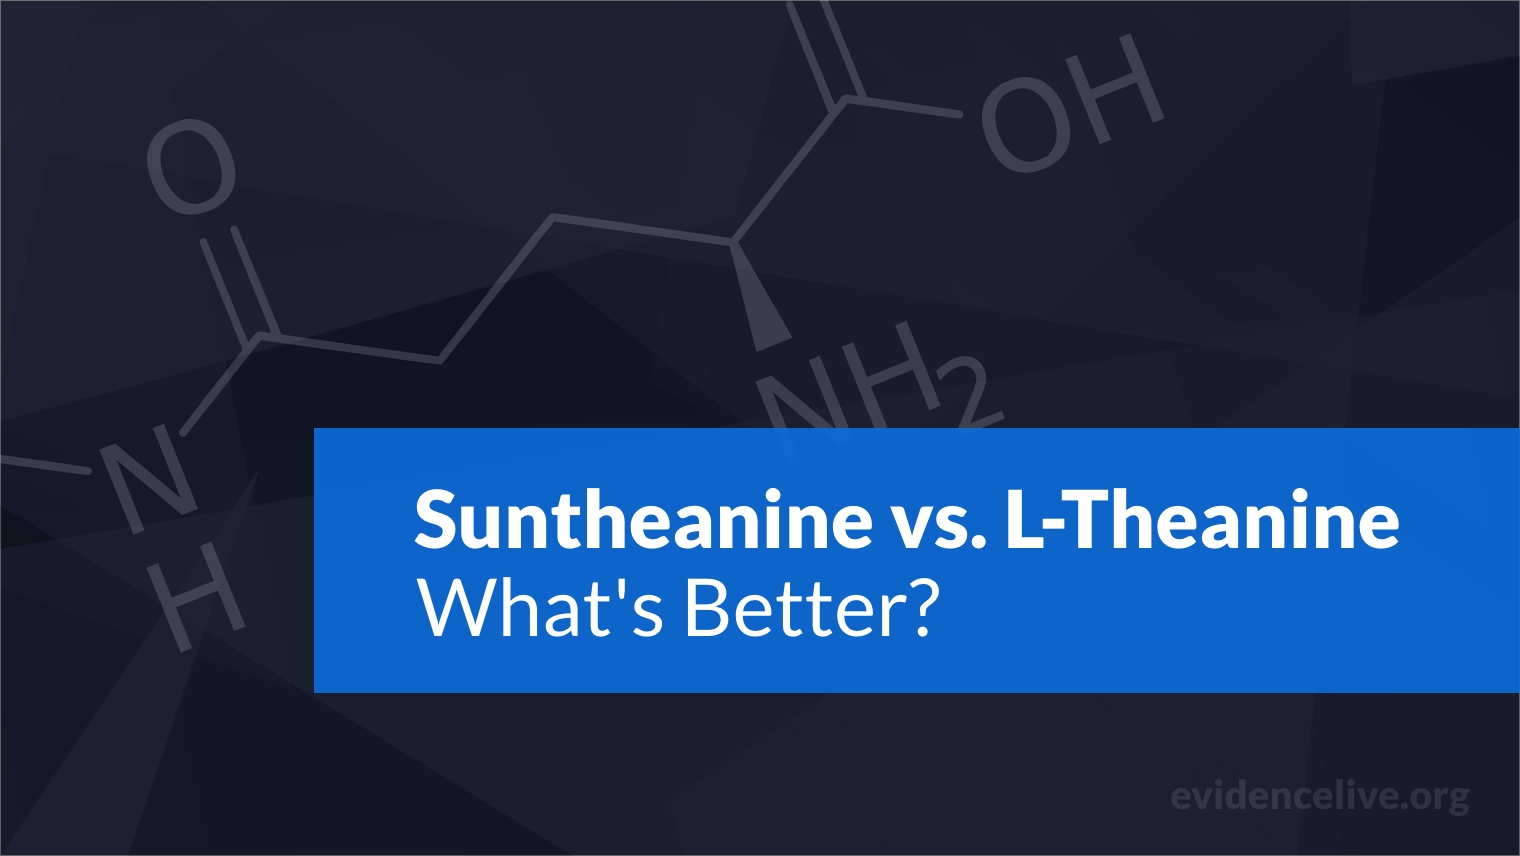 Suntheanine vs. L-Theanine: Differences and What’s Better